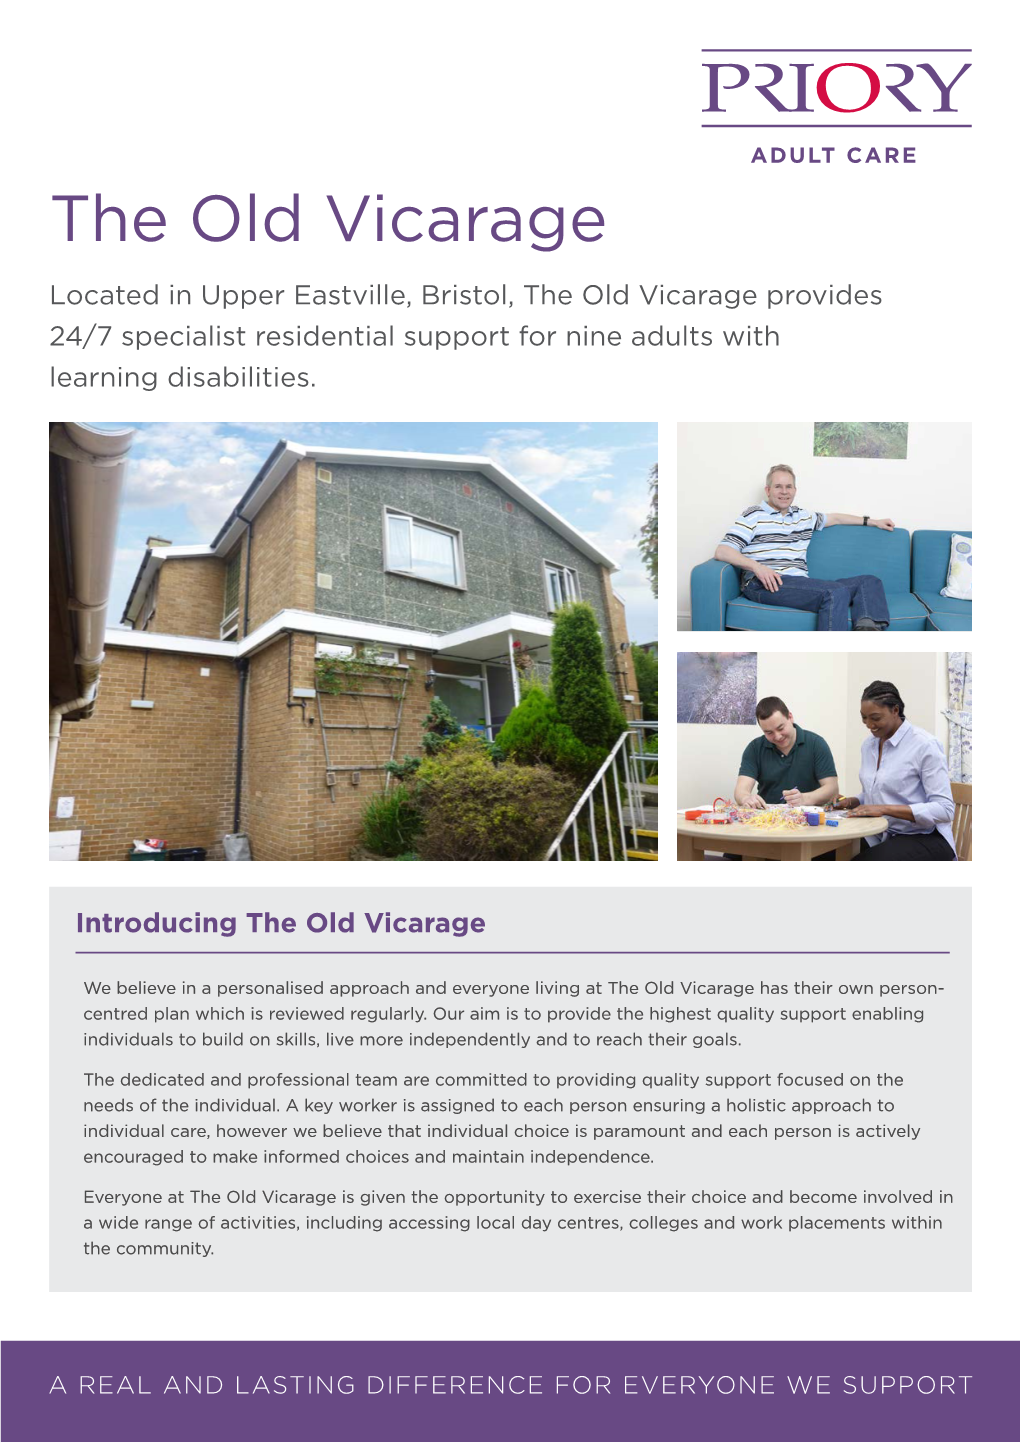 The Old Vicarage Located in Upper Eastville, Bristol, the Old Vicarage Provides 24/7 Specialist Residential Support for Nine Adults with Learning Disabilities